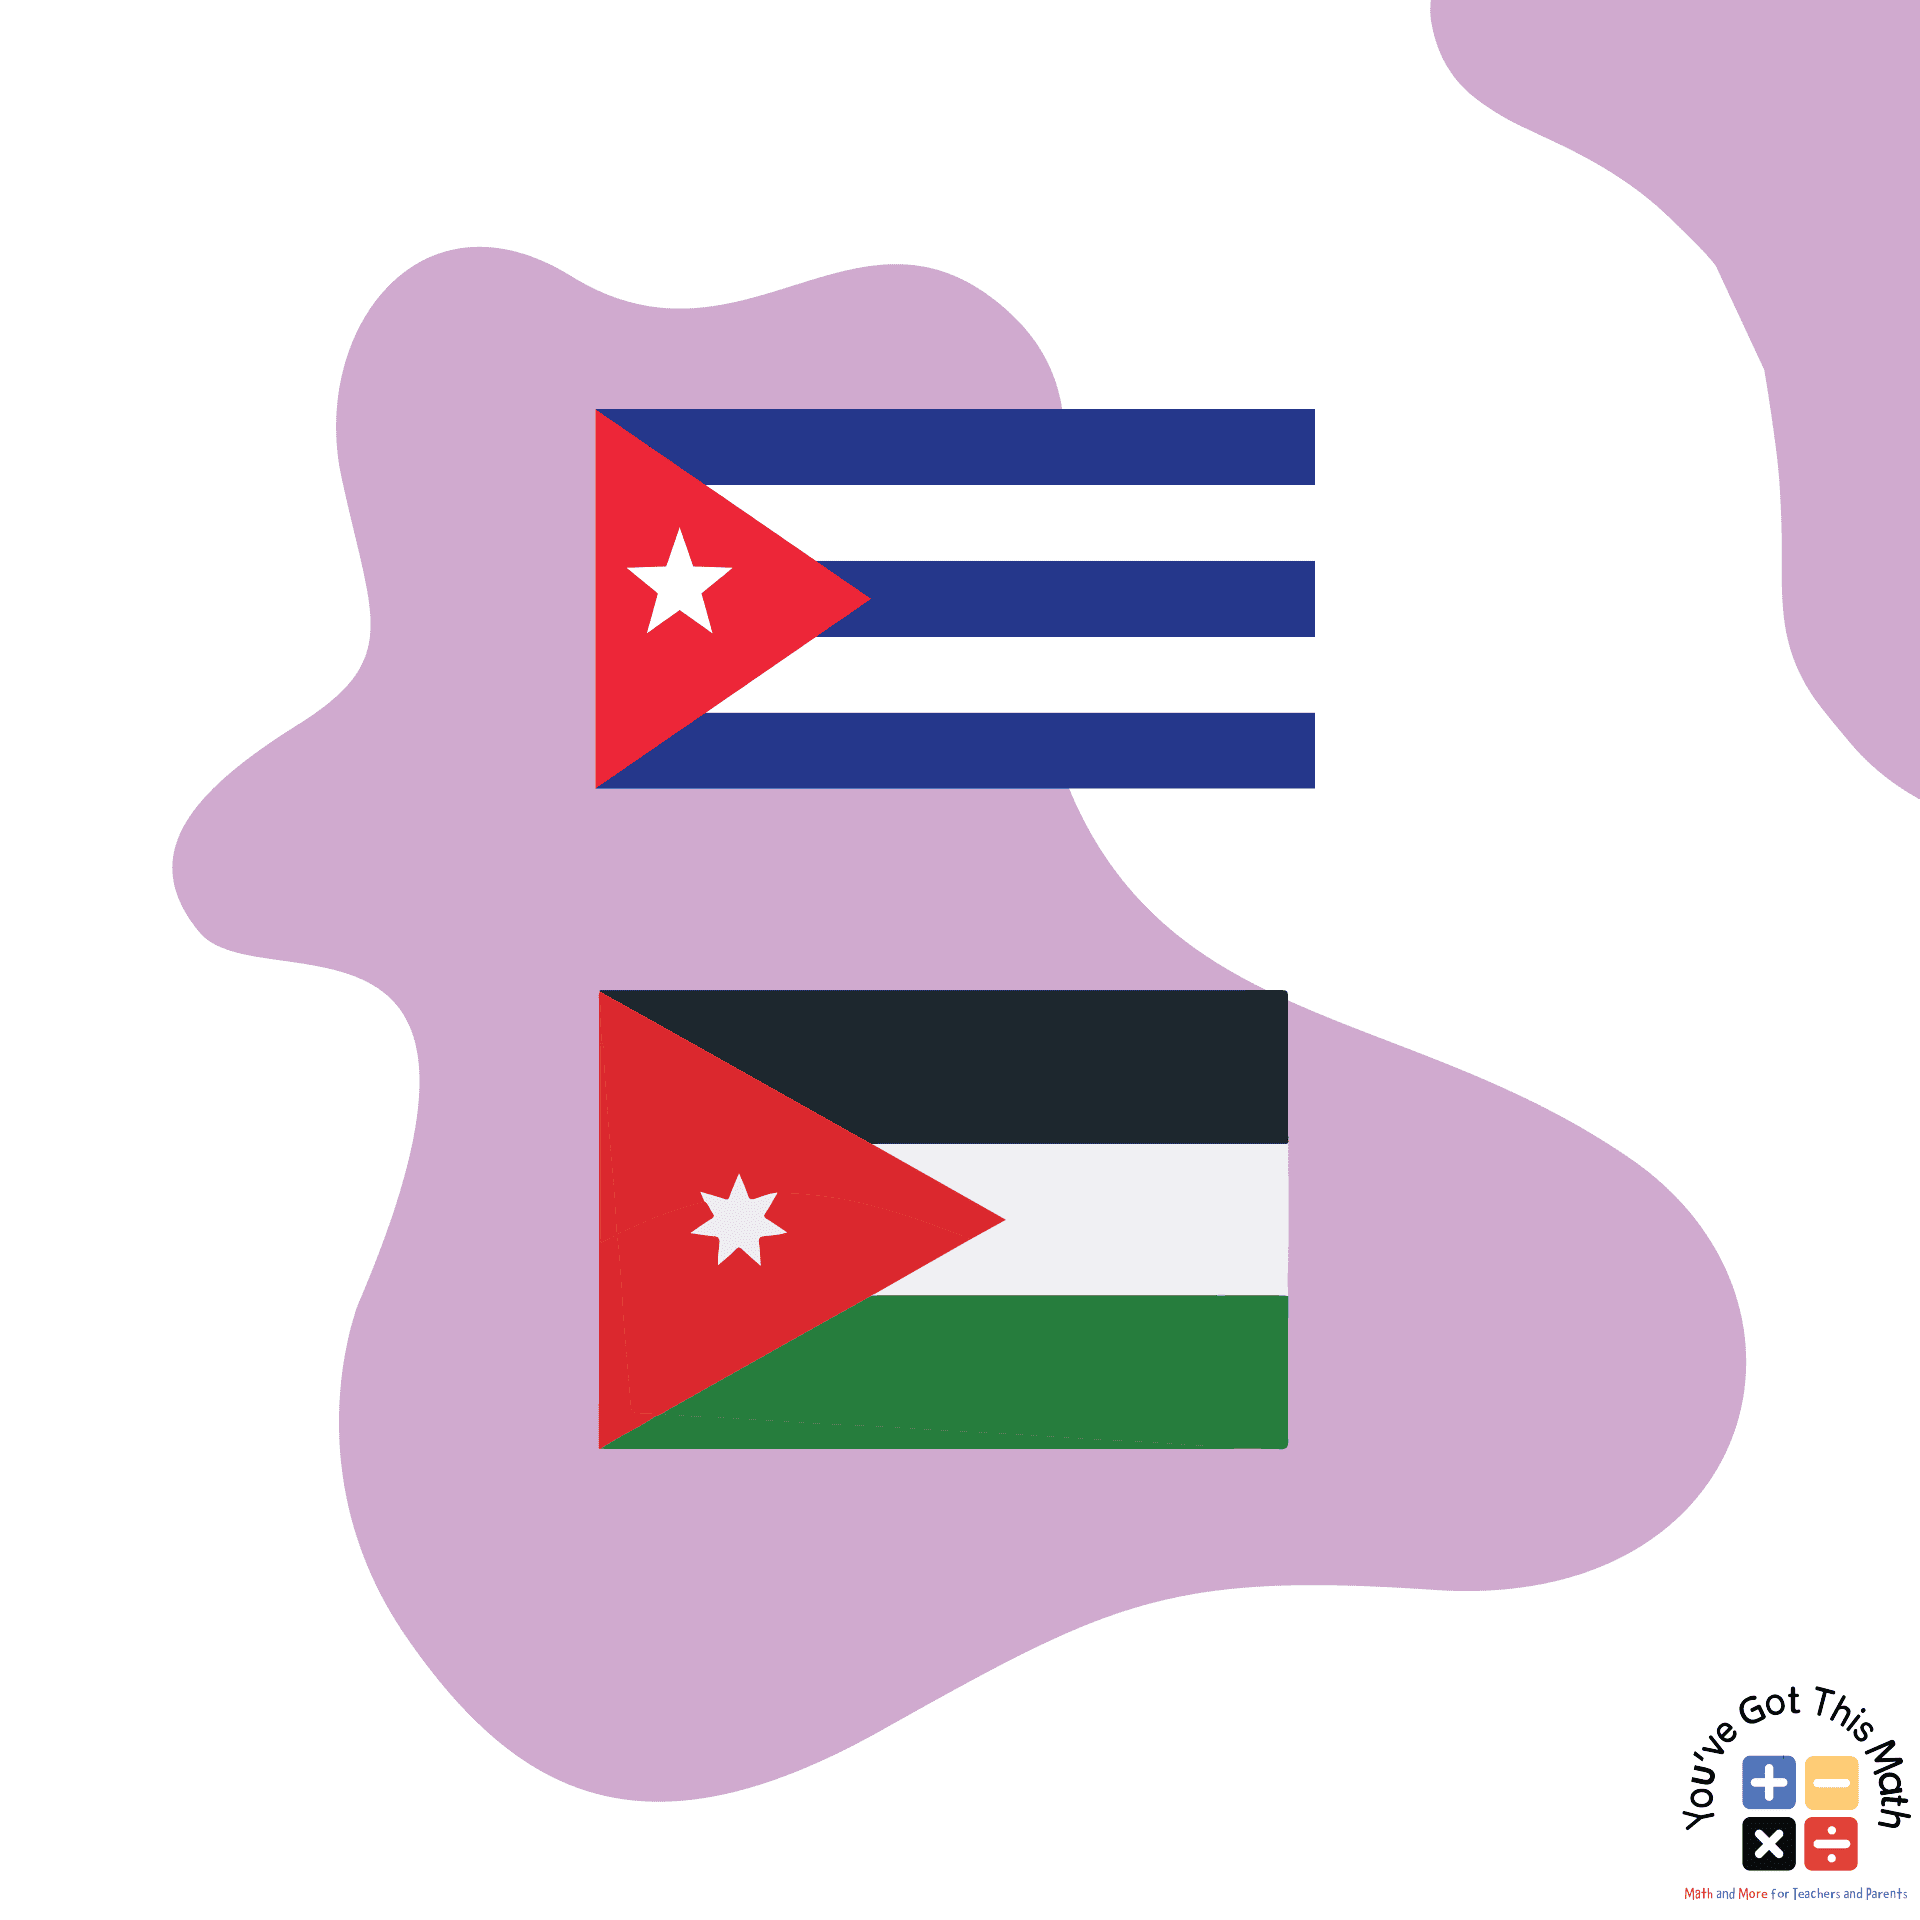 10- Jordan and Cuba’s flag to show the equilateral triangle in real life